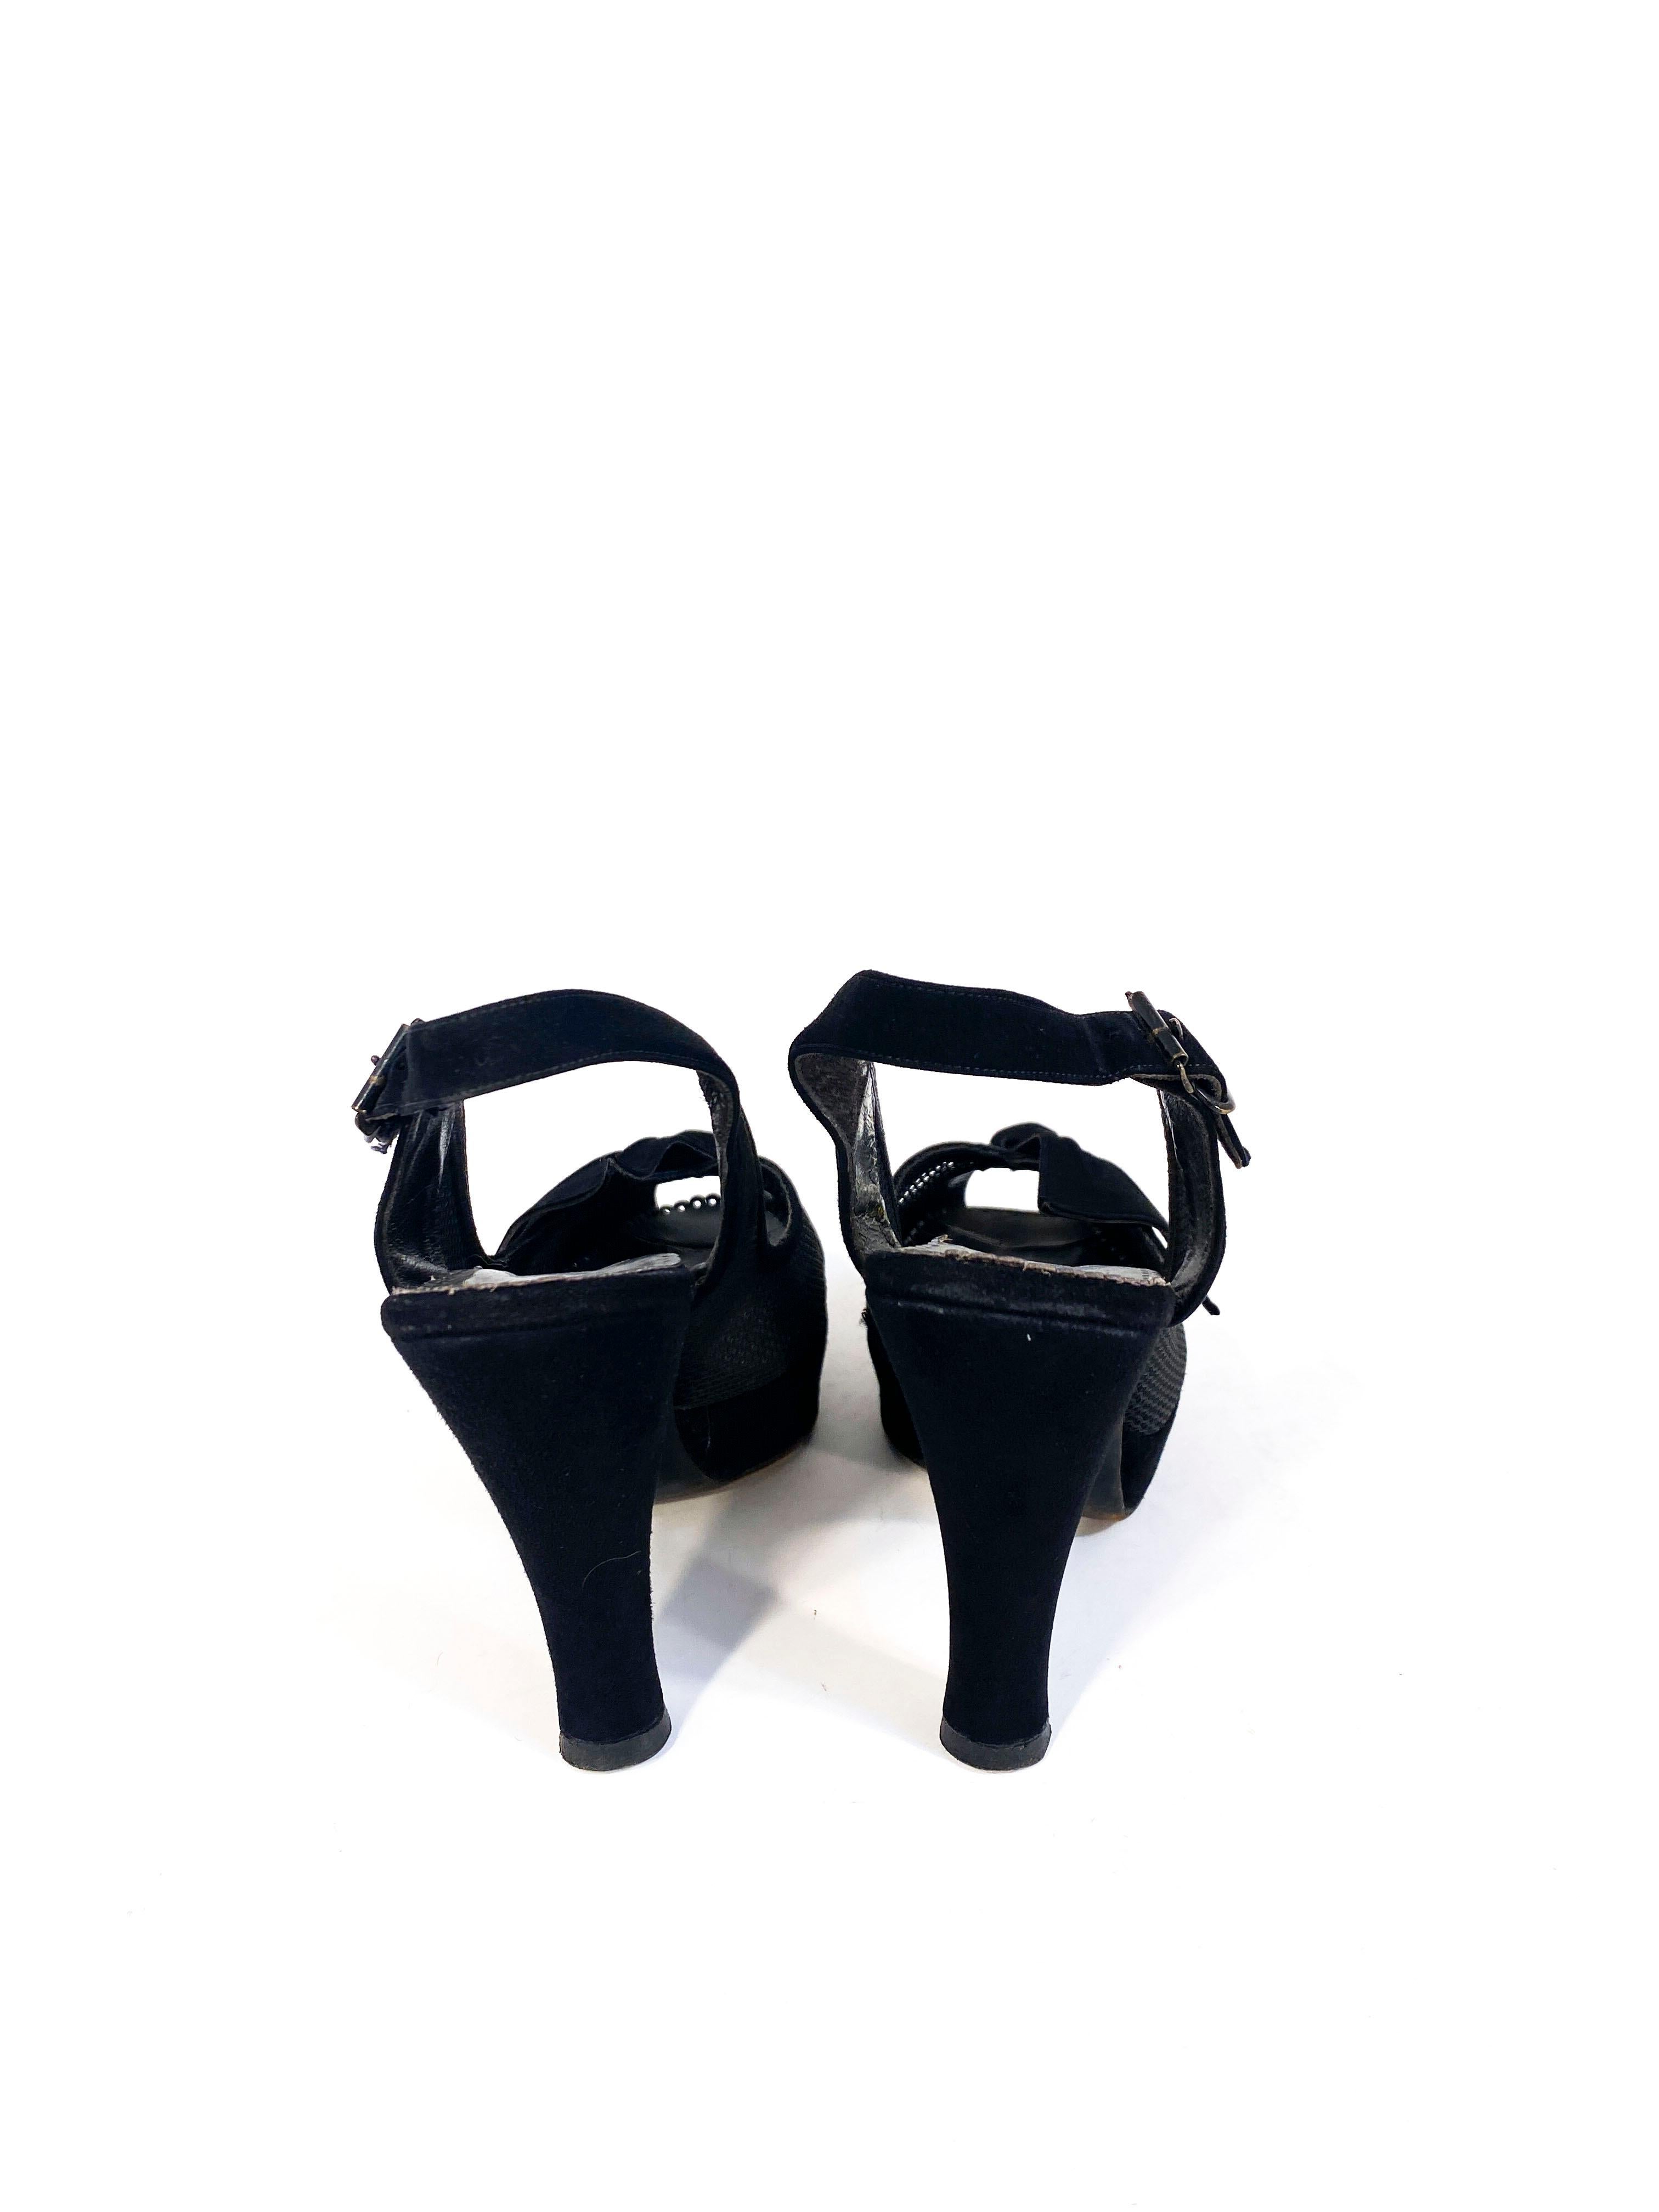 1940s Black Suede and Mesh Platform Heels In Good Condition For Sale In San Francisco, CA